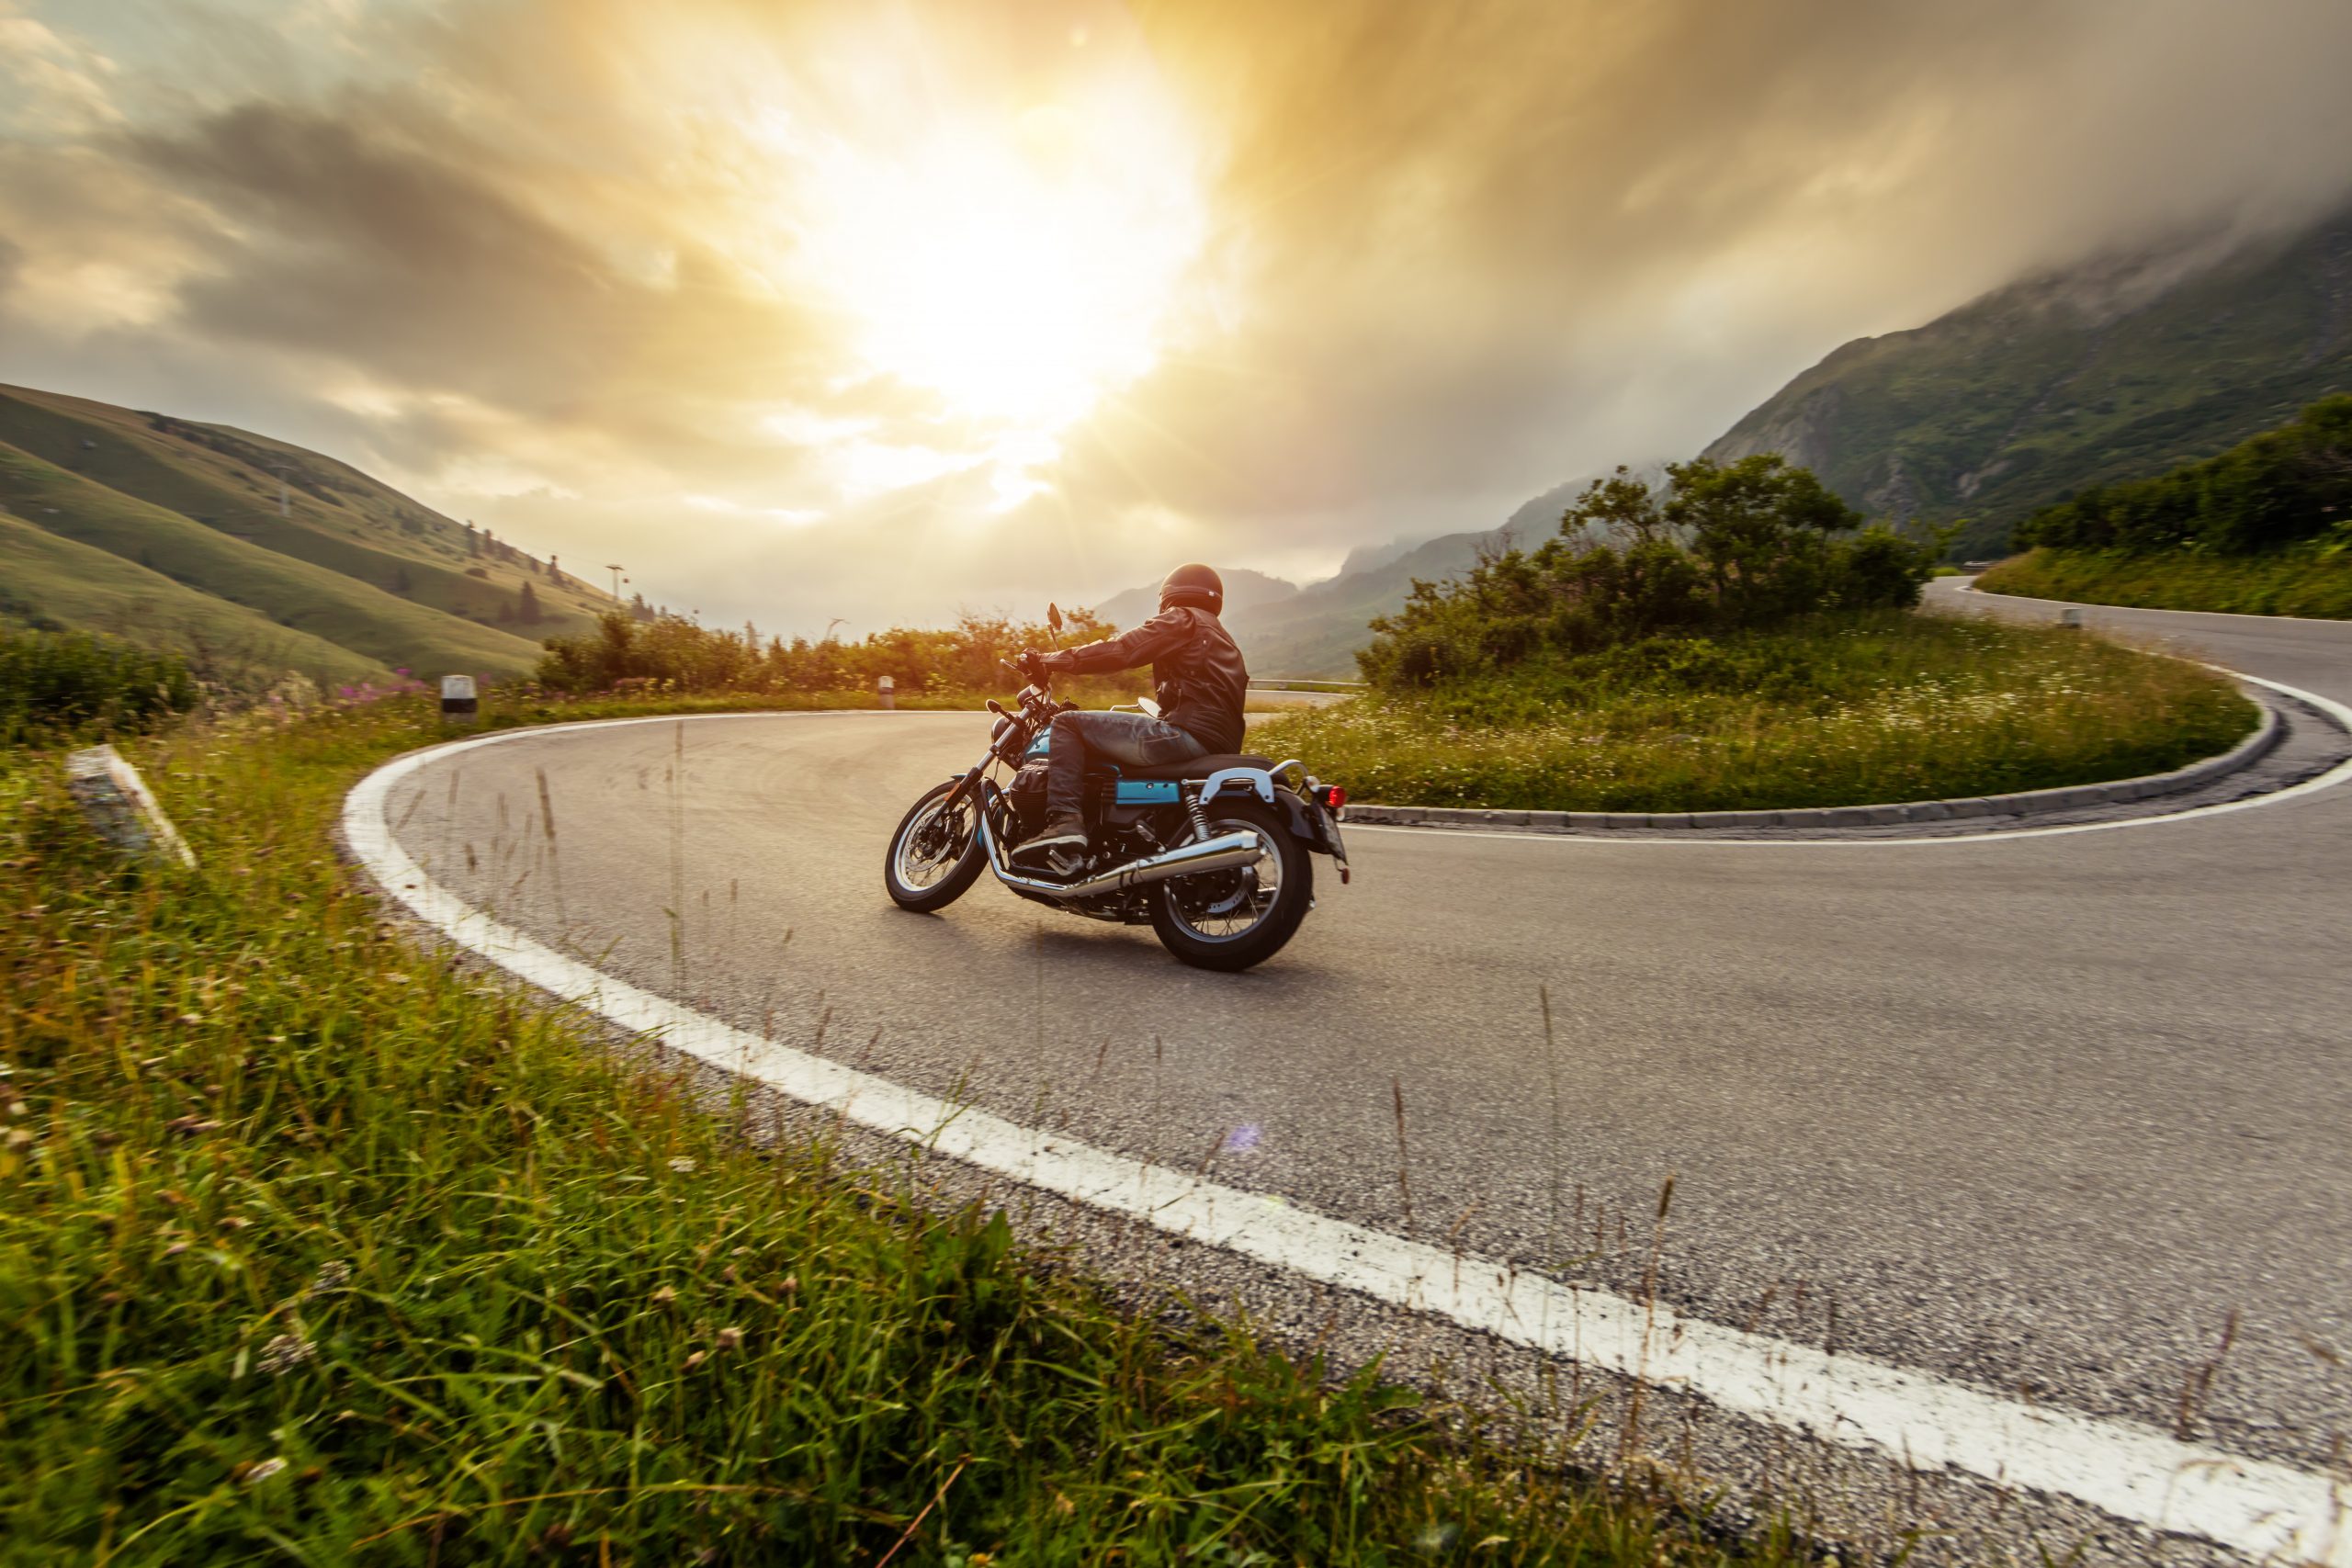 5 steps to deter motorcycle theft